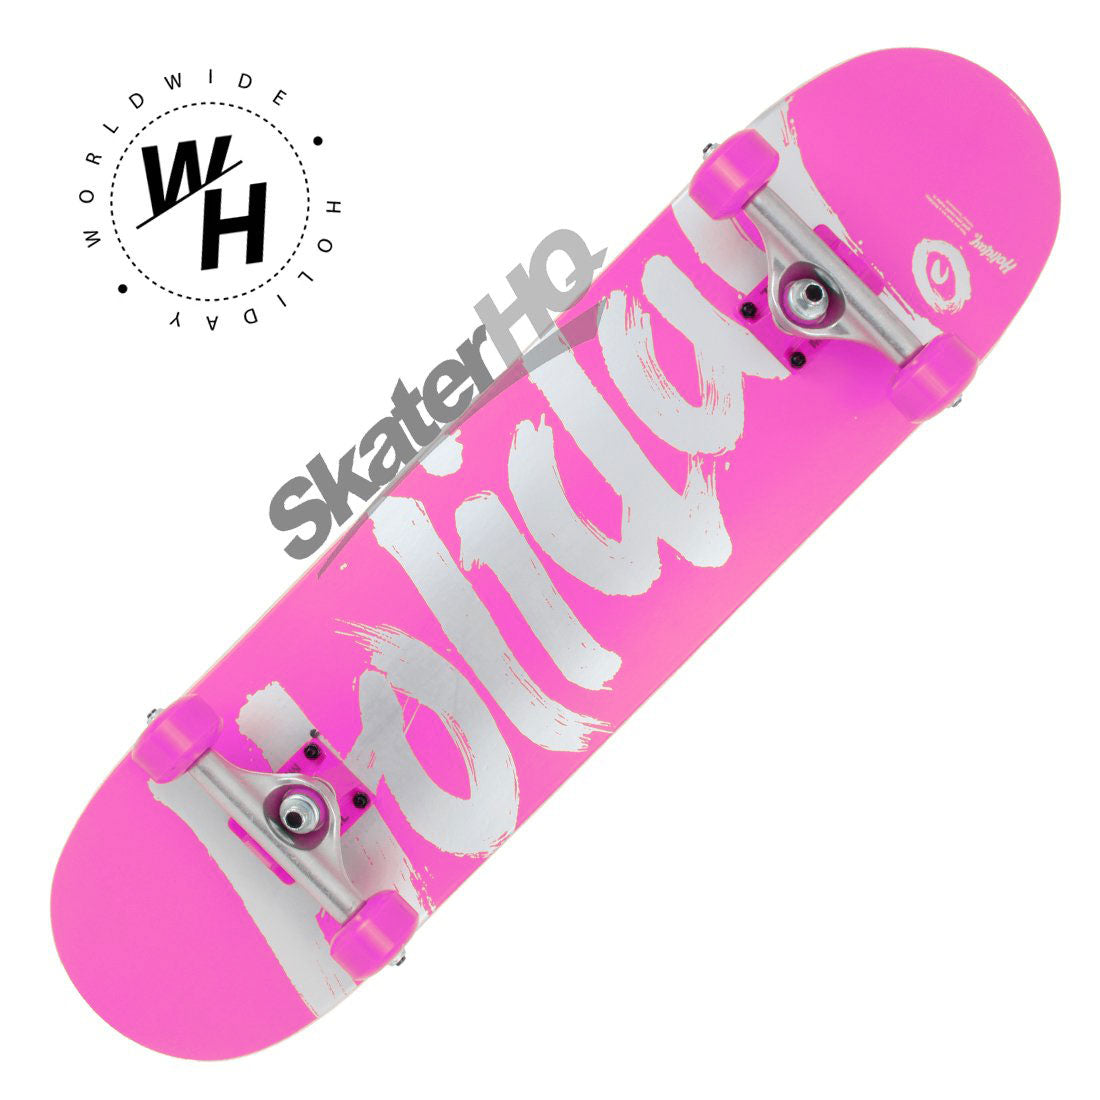 Holiday Safety First 7.75 Complete - Pink Skateboard Completes Modern Street